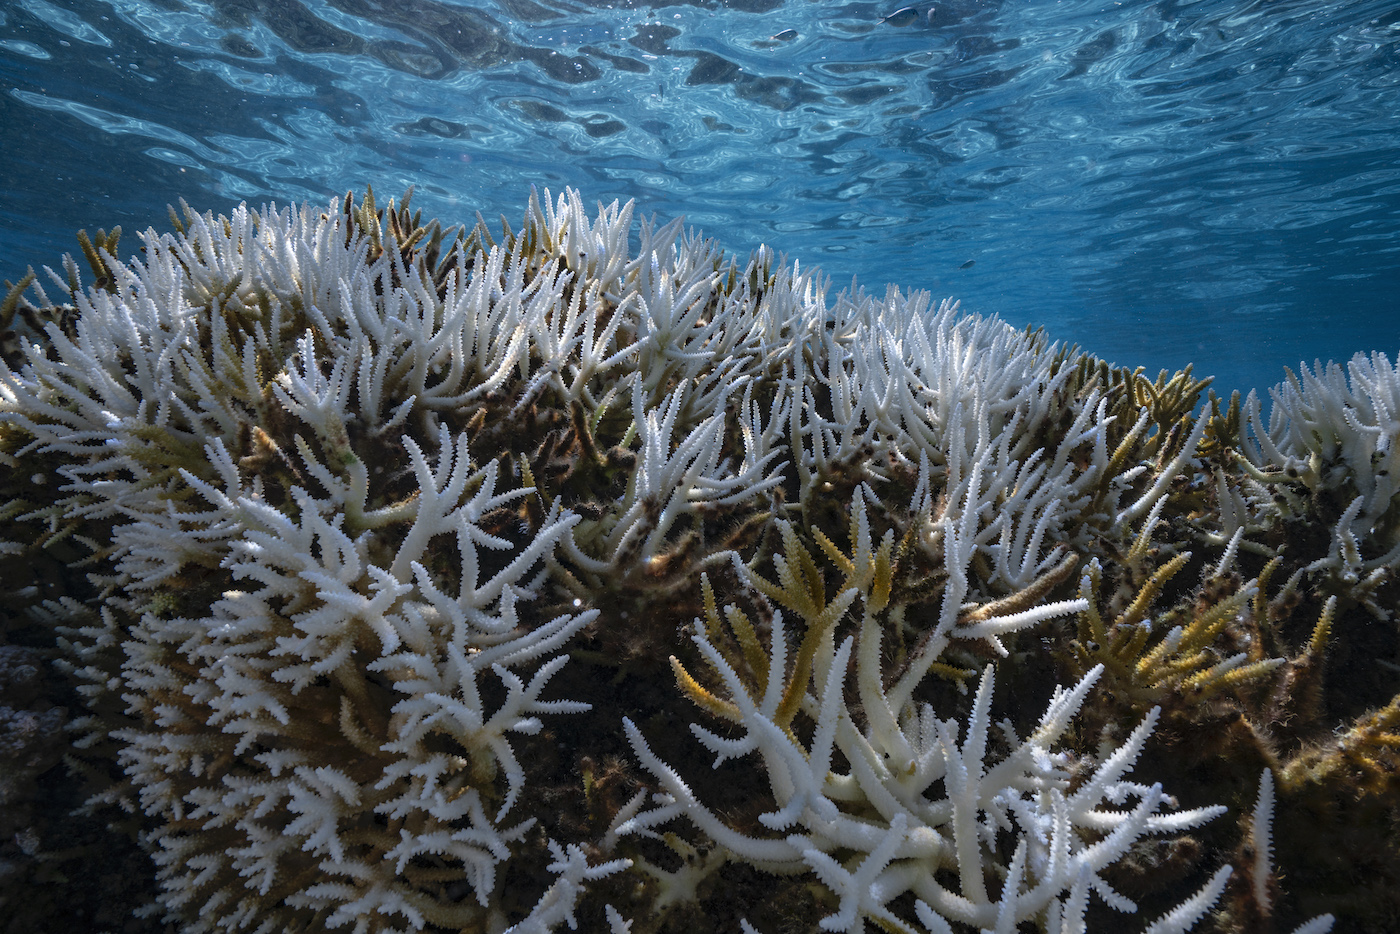 Coral reefs that have turned white due to warmer ocean temperatures